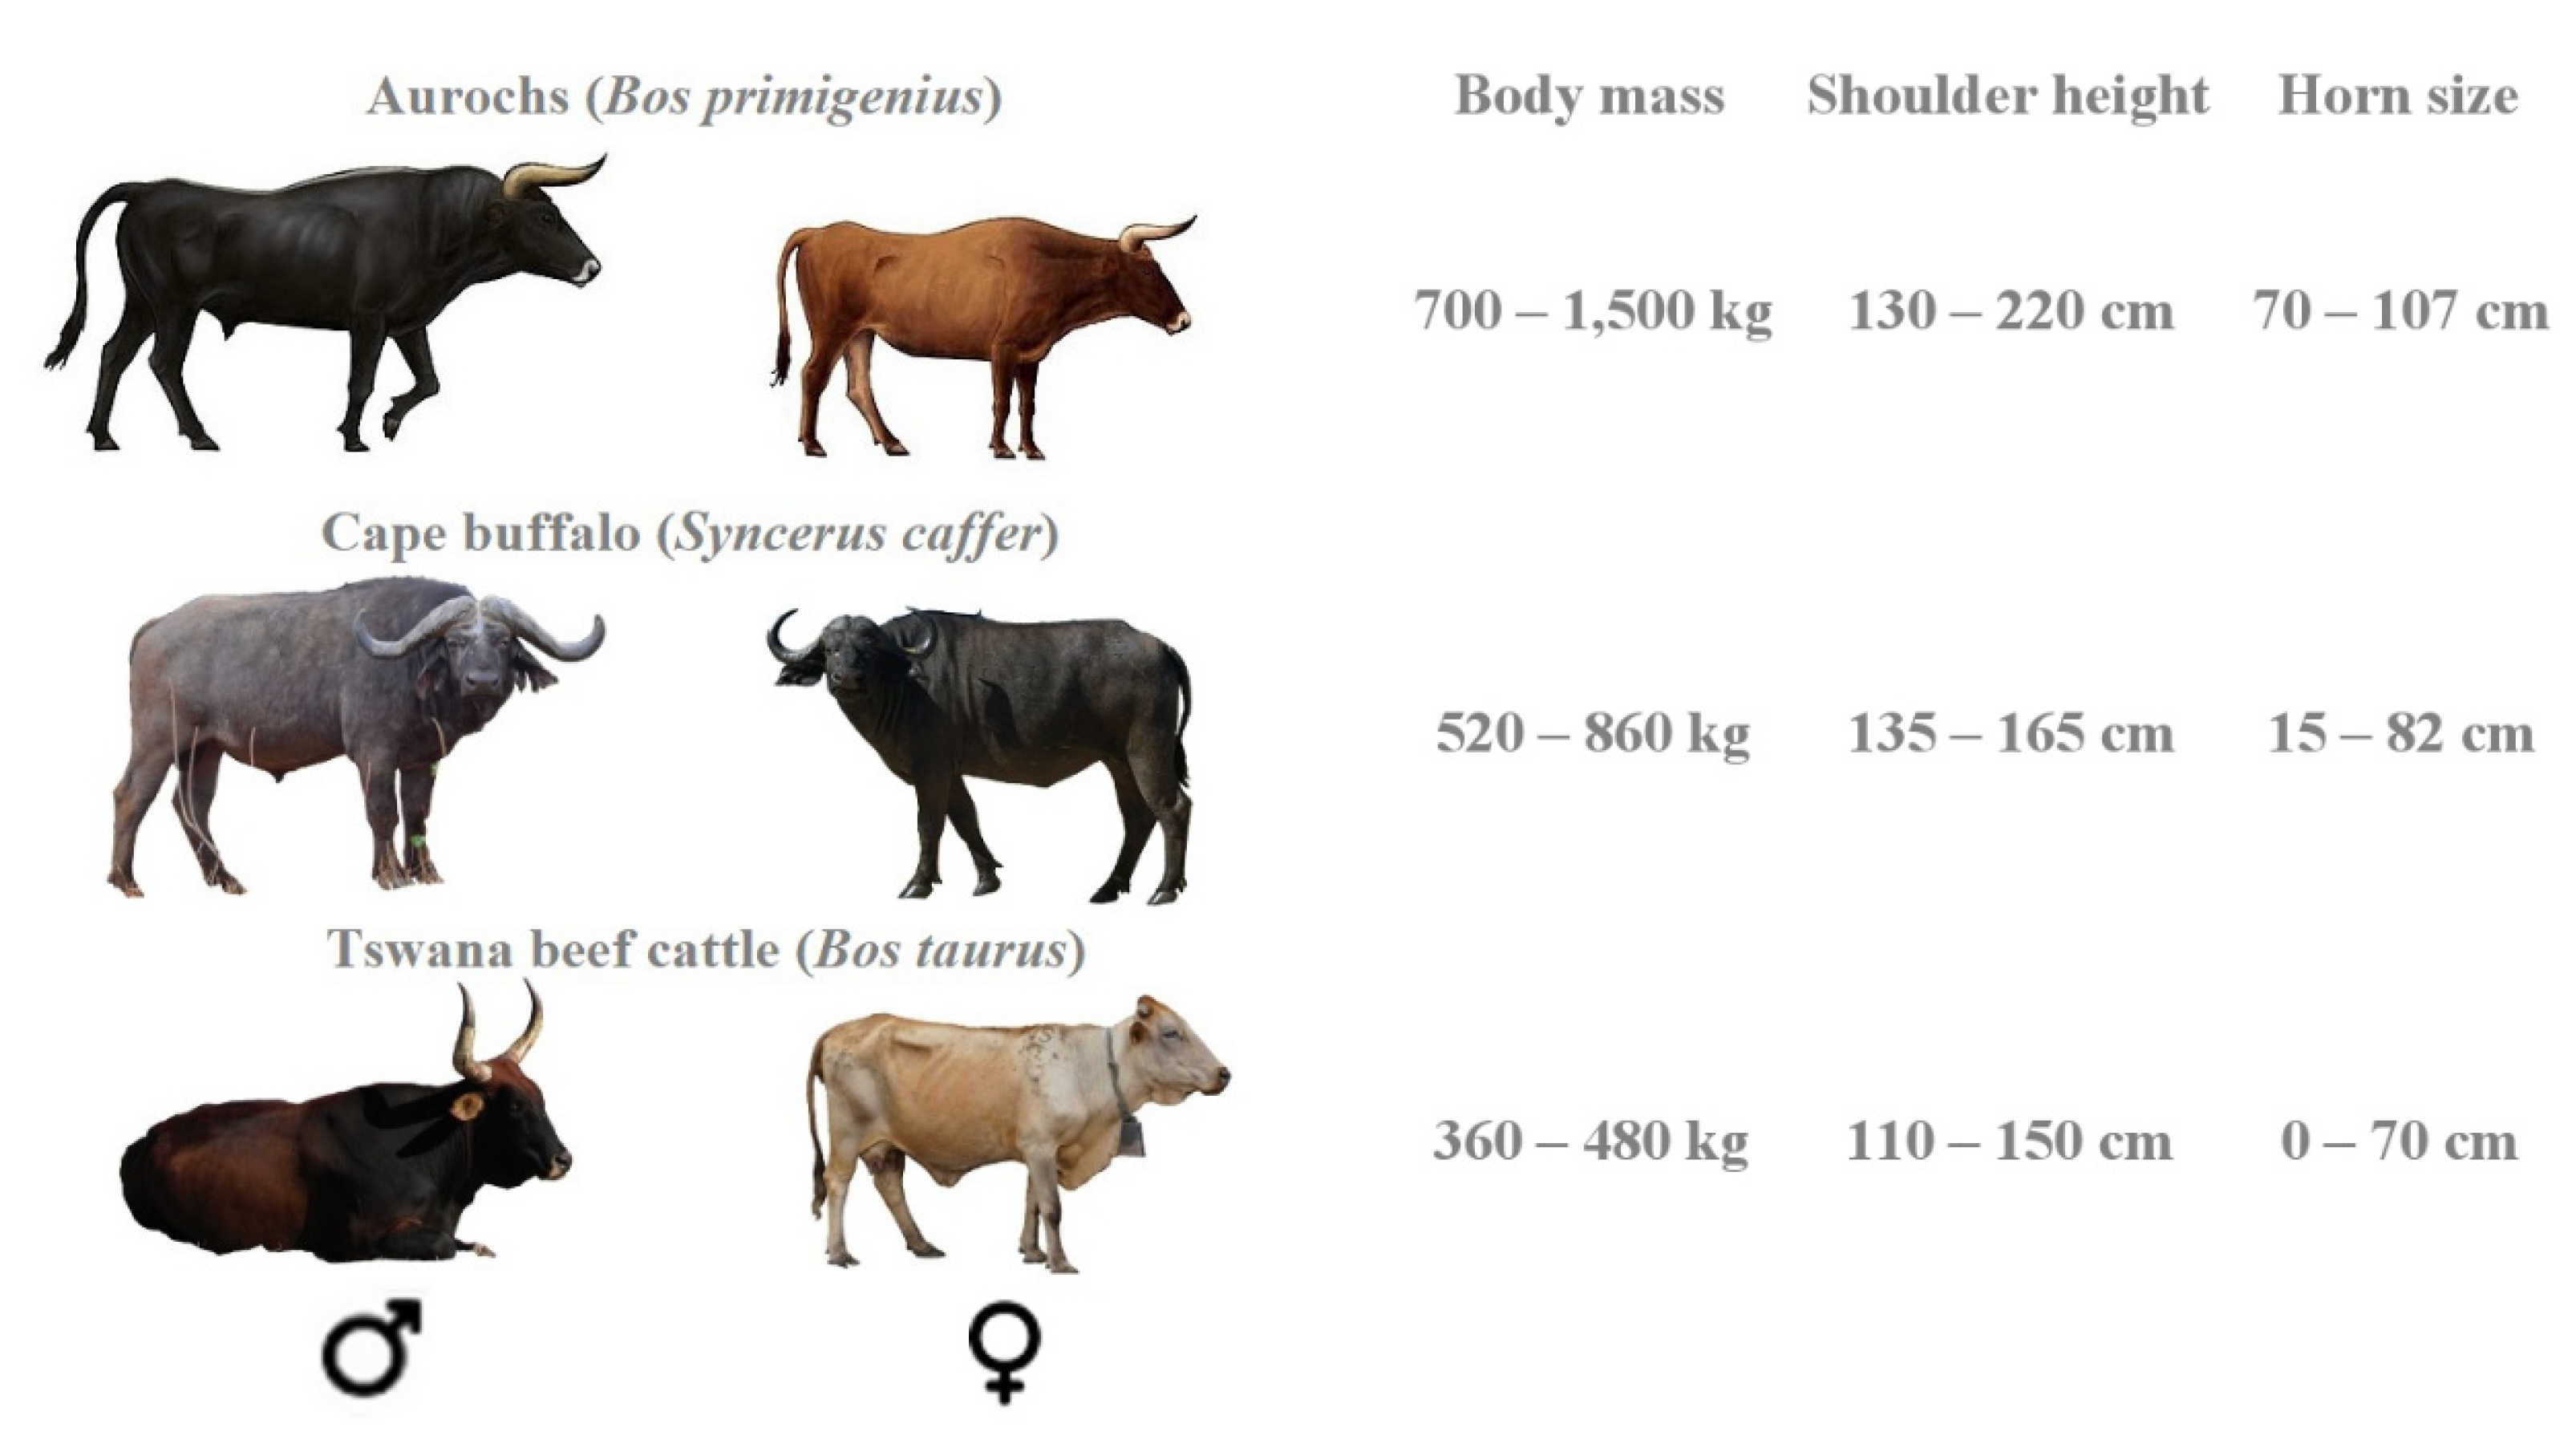 What are some characteristics of bulls?